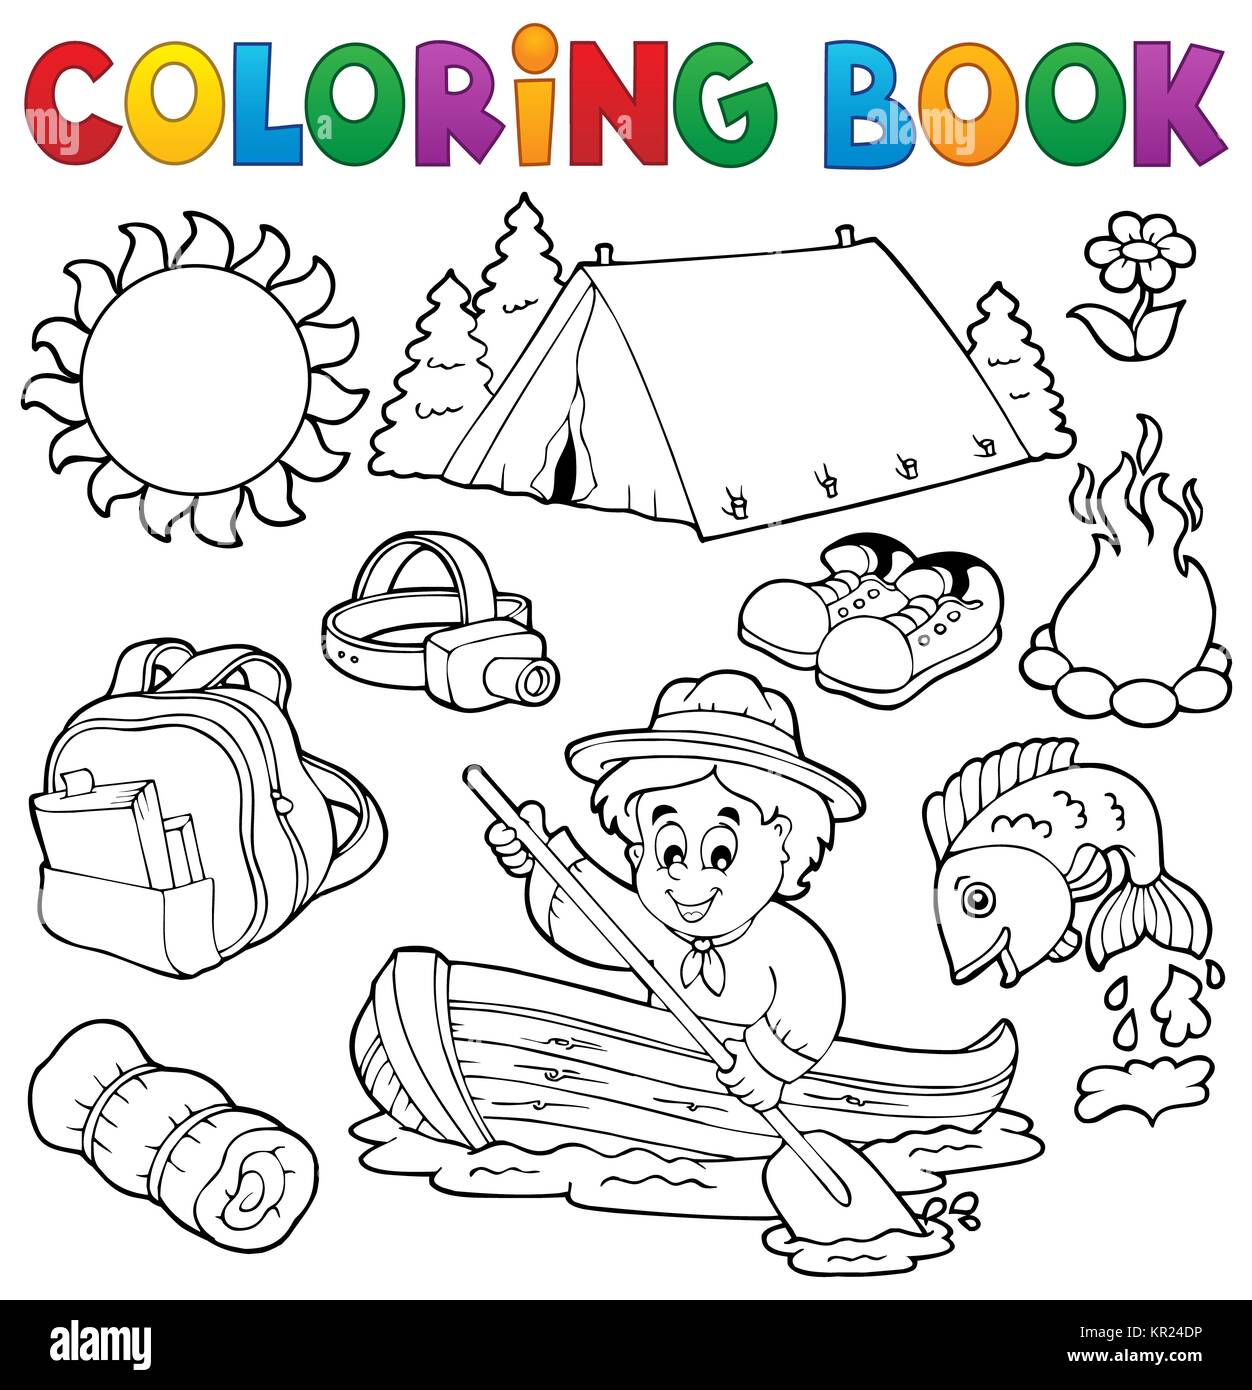 Coloring book summer outdoor collection Stock Photo